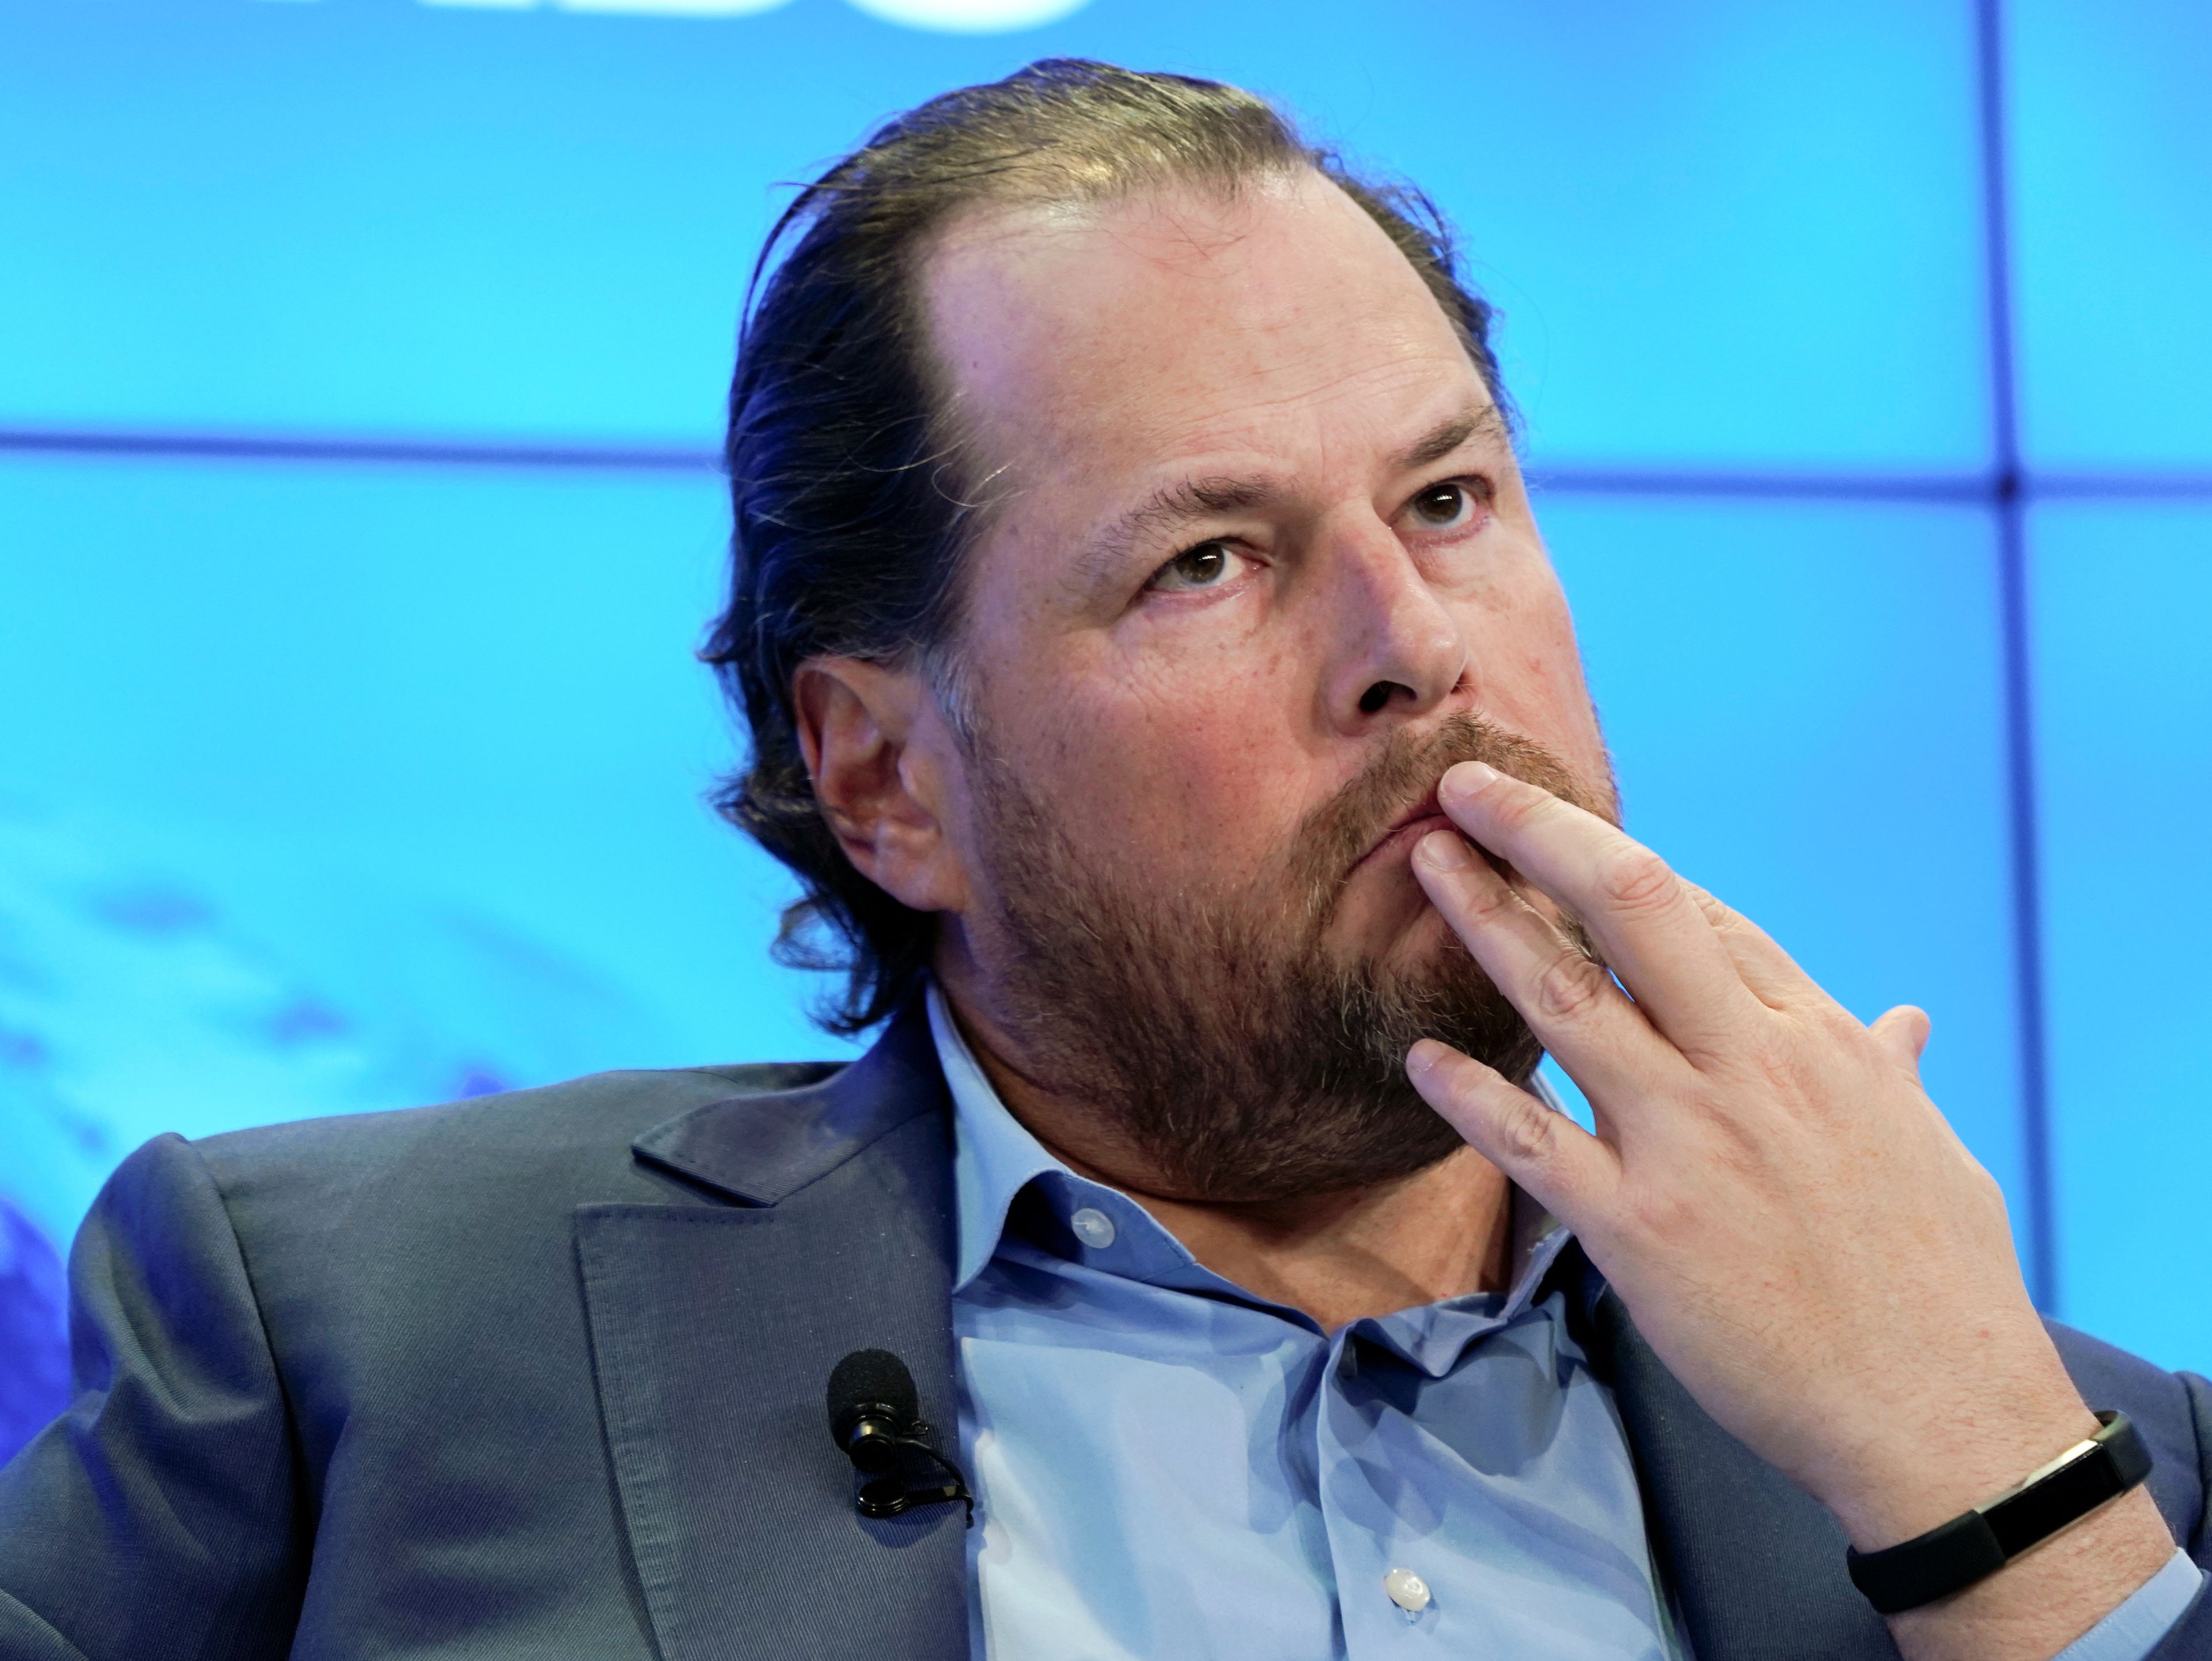 Marc Benioff, Co-Founder And Co-Ceo Of Salesforce.